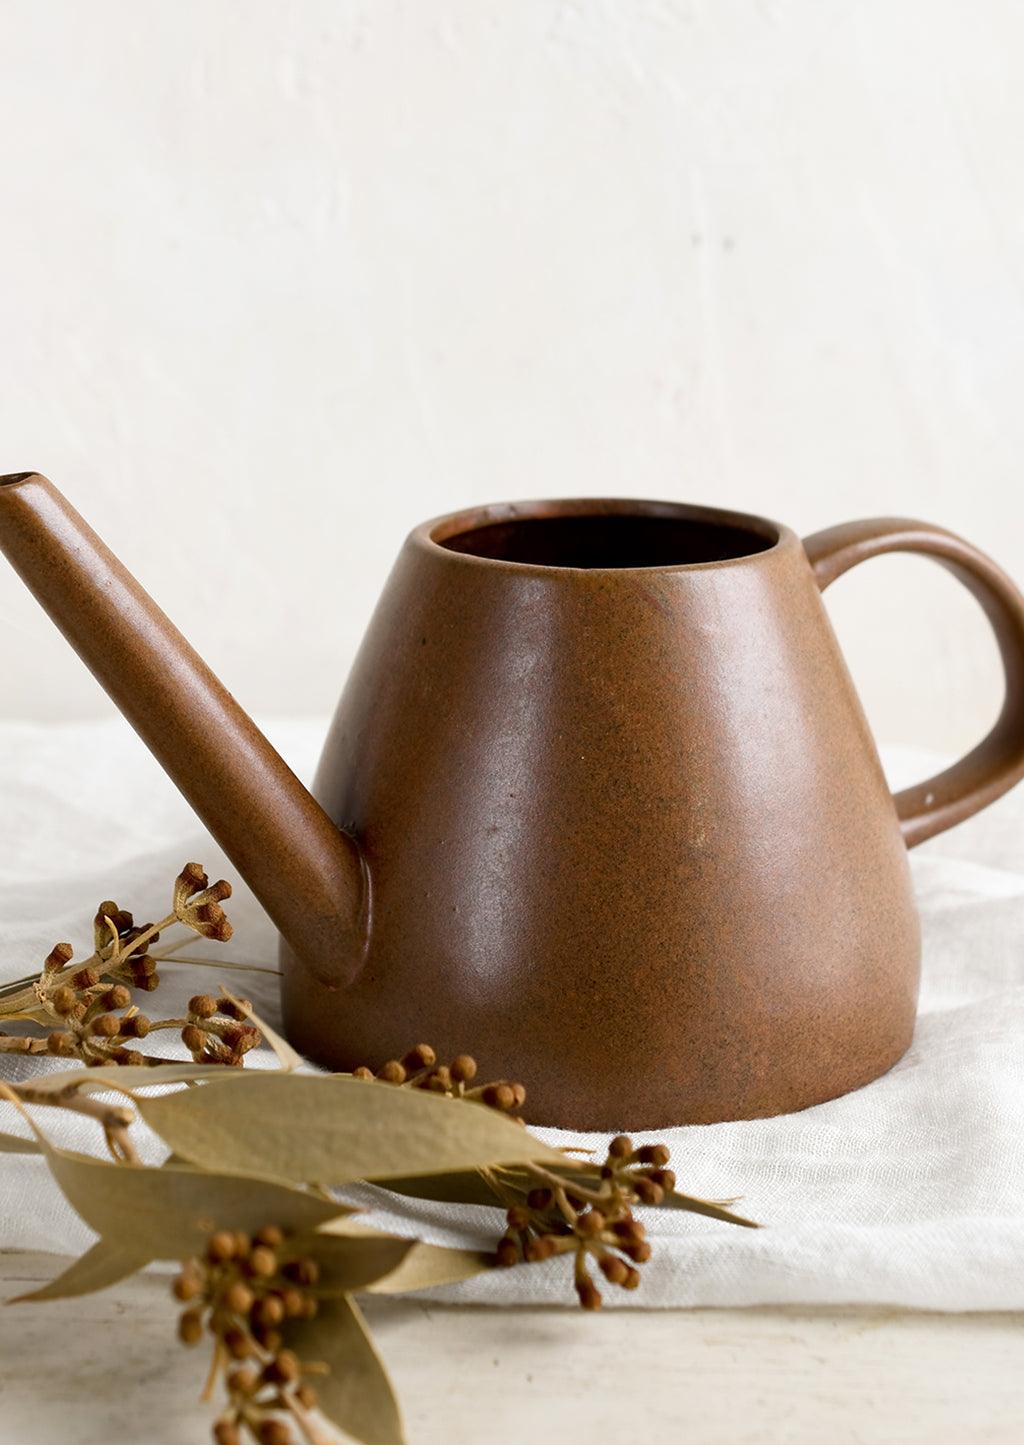 1: A ceramic watering can in brown color.